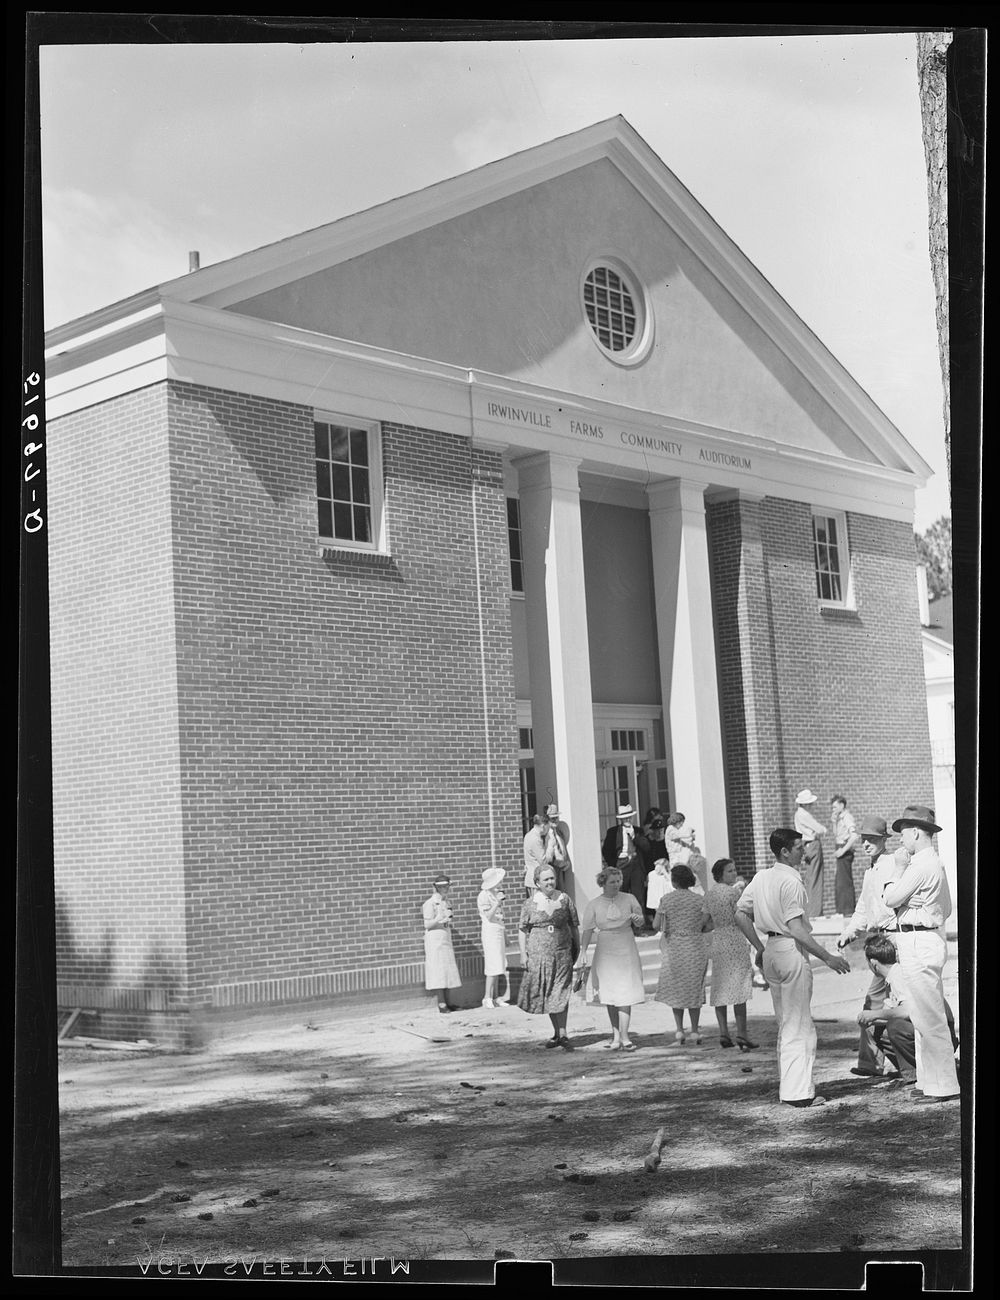 [Untitled photo, possibly related to: Irwinville Farms community auditorium on May Day-Health Day, Georgia]. Sourced from…